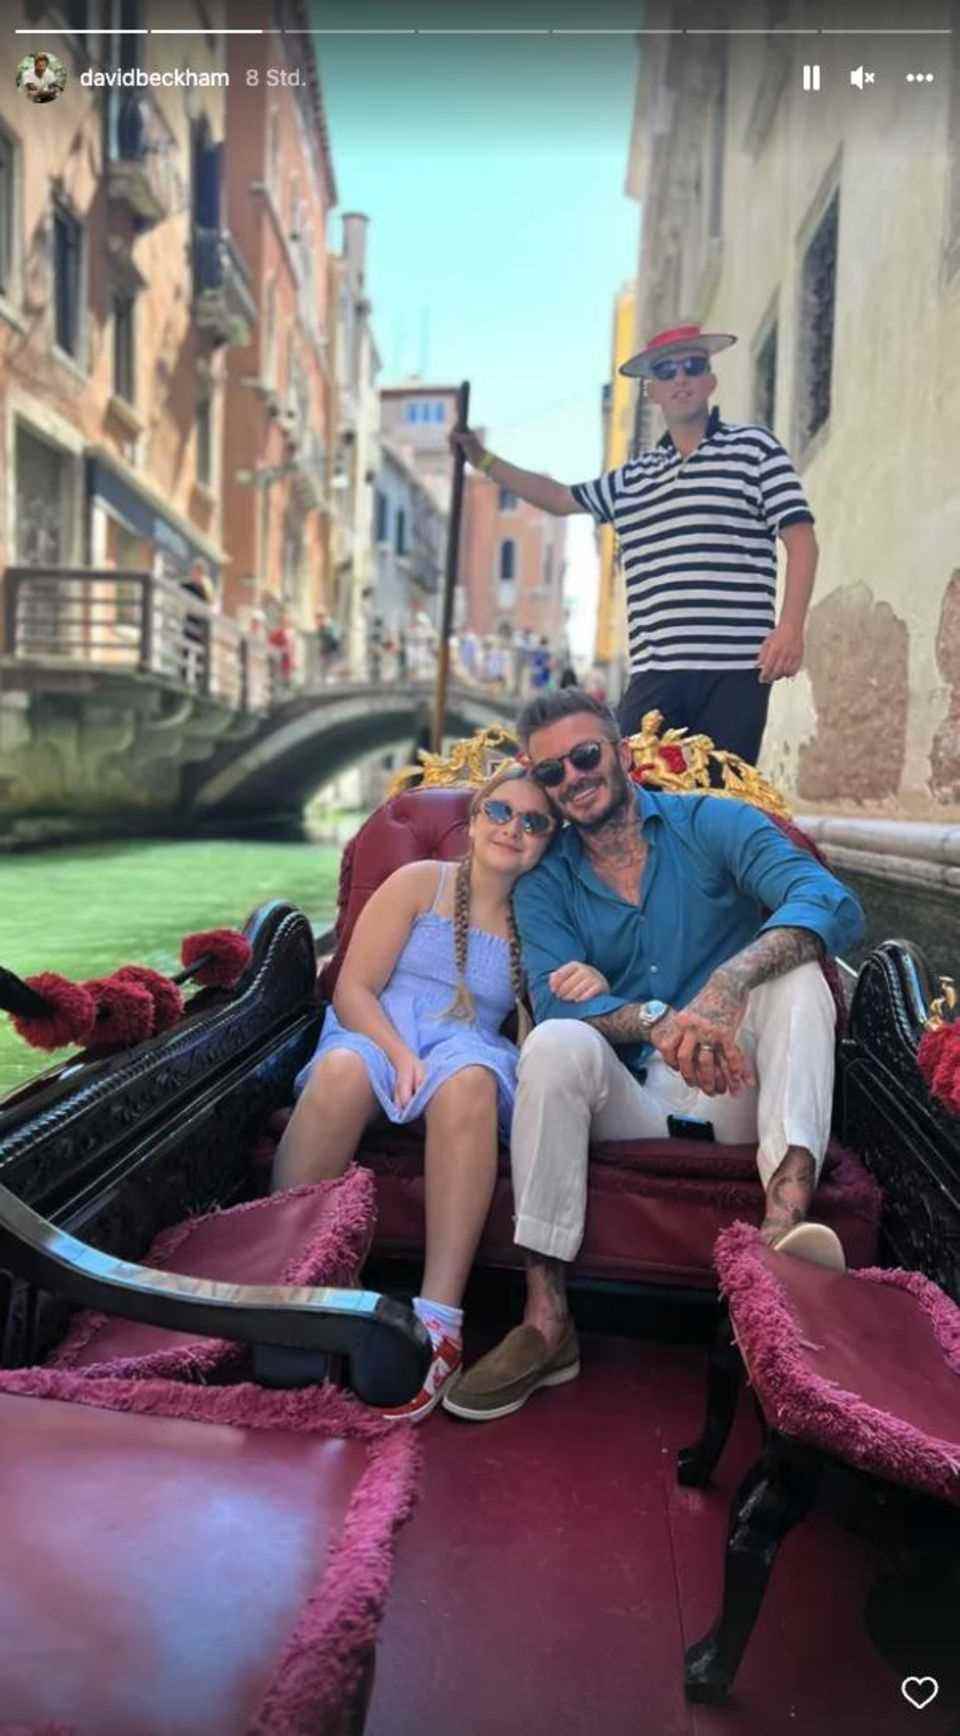 Harper and David Beckham enjoying their time together in Venice. 